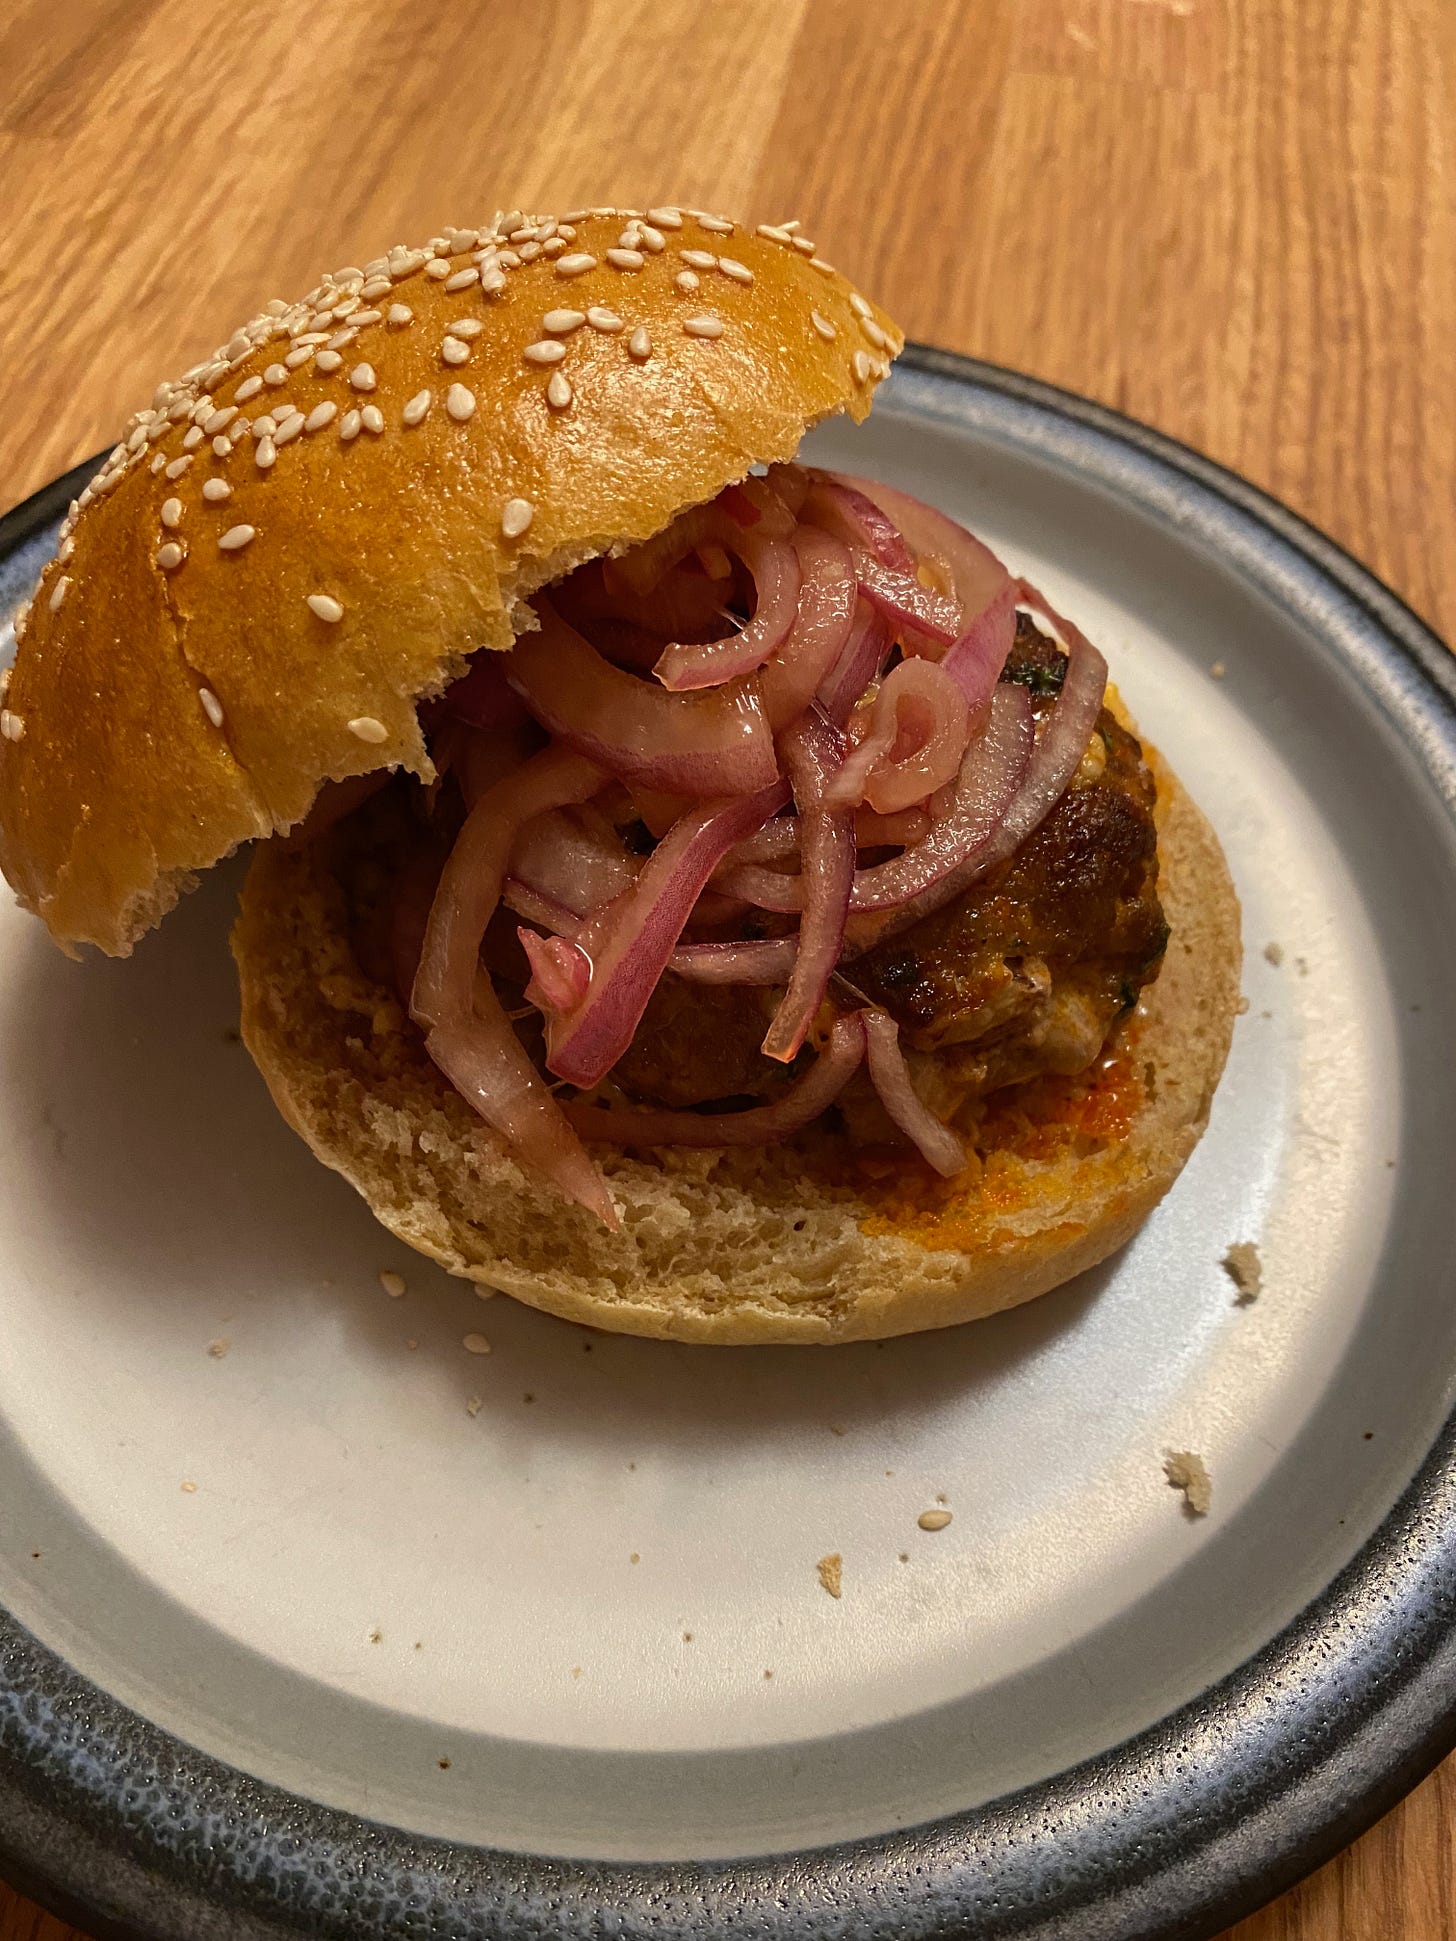 A burger on a blue ceramic plate. The top of the bun sits to one side, revealing a burger patty topped with a pile of pickled onions inside.